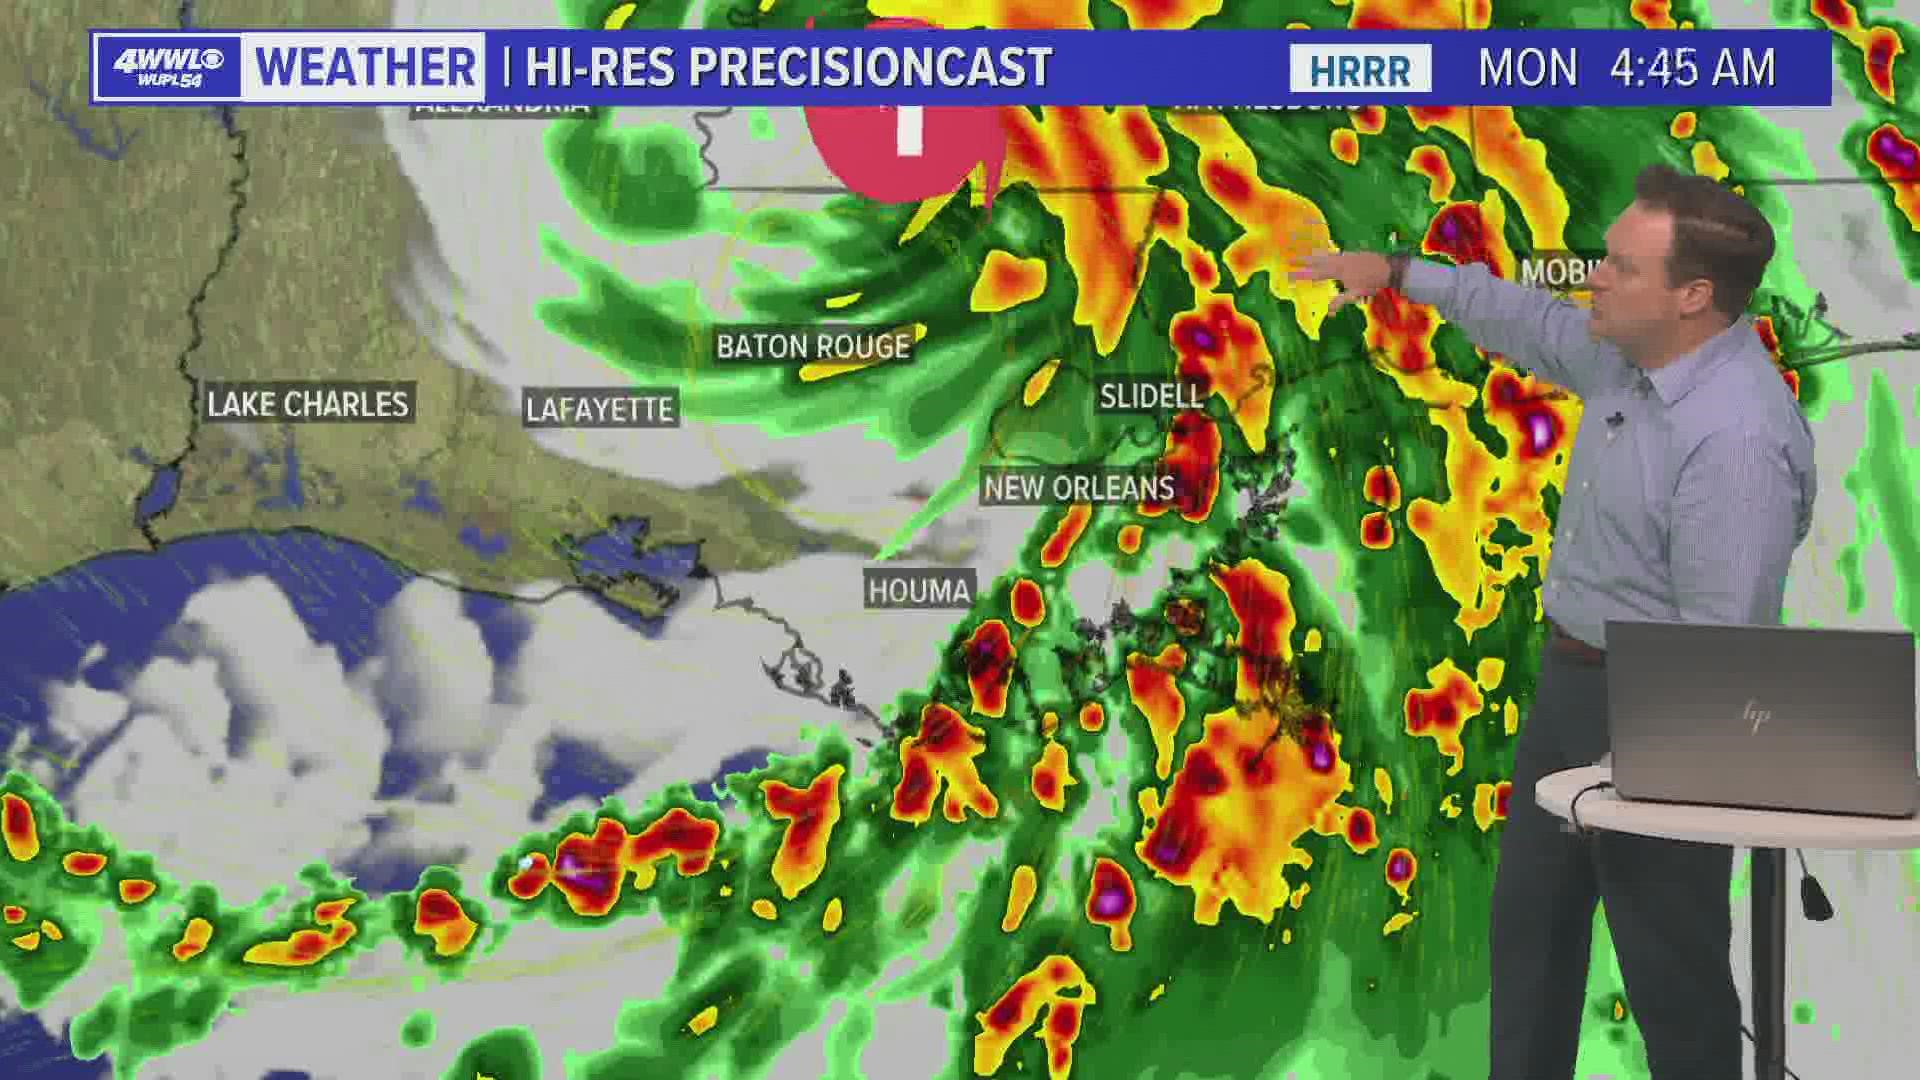 Louisiana is still dealing with dangerous winds and flooding as Hurricane Ida heads north.